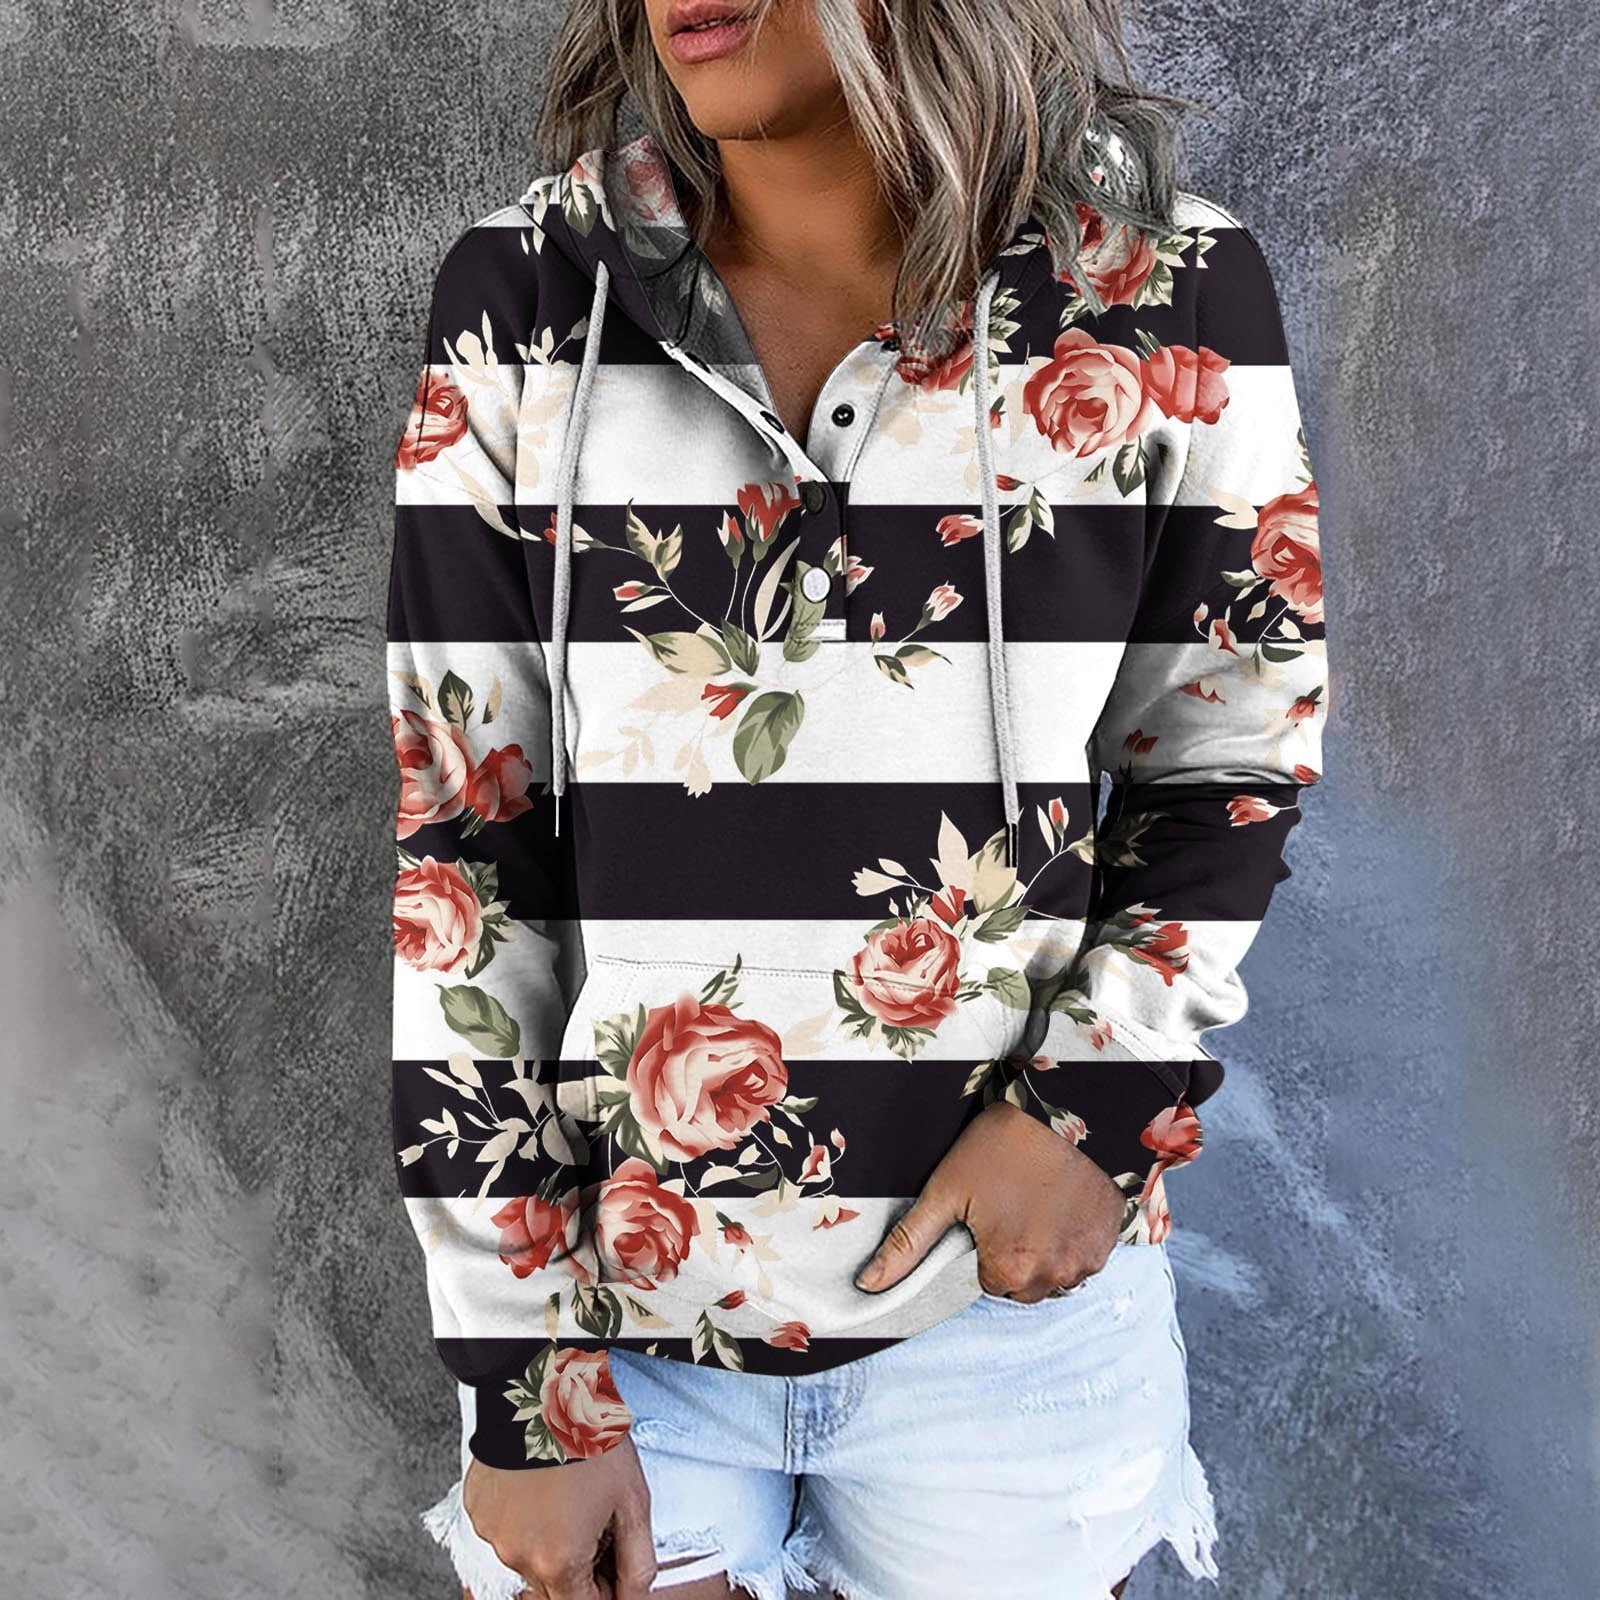 RQYYD Tie Dye Hoodie for Women Button Up Drawstring Sweatshirts Long Sleeve  Pullover Tops with Pocket 